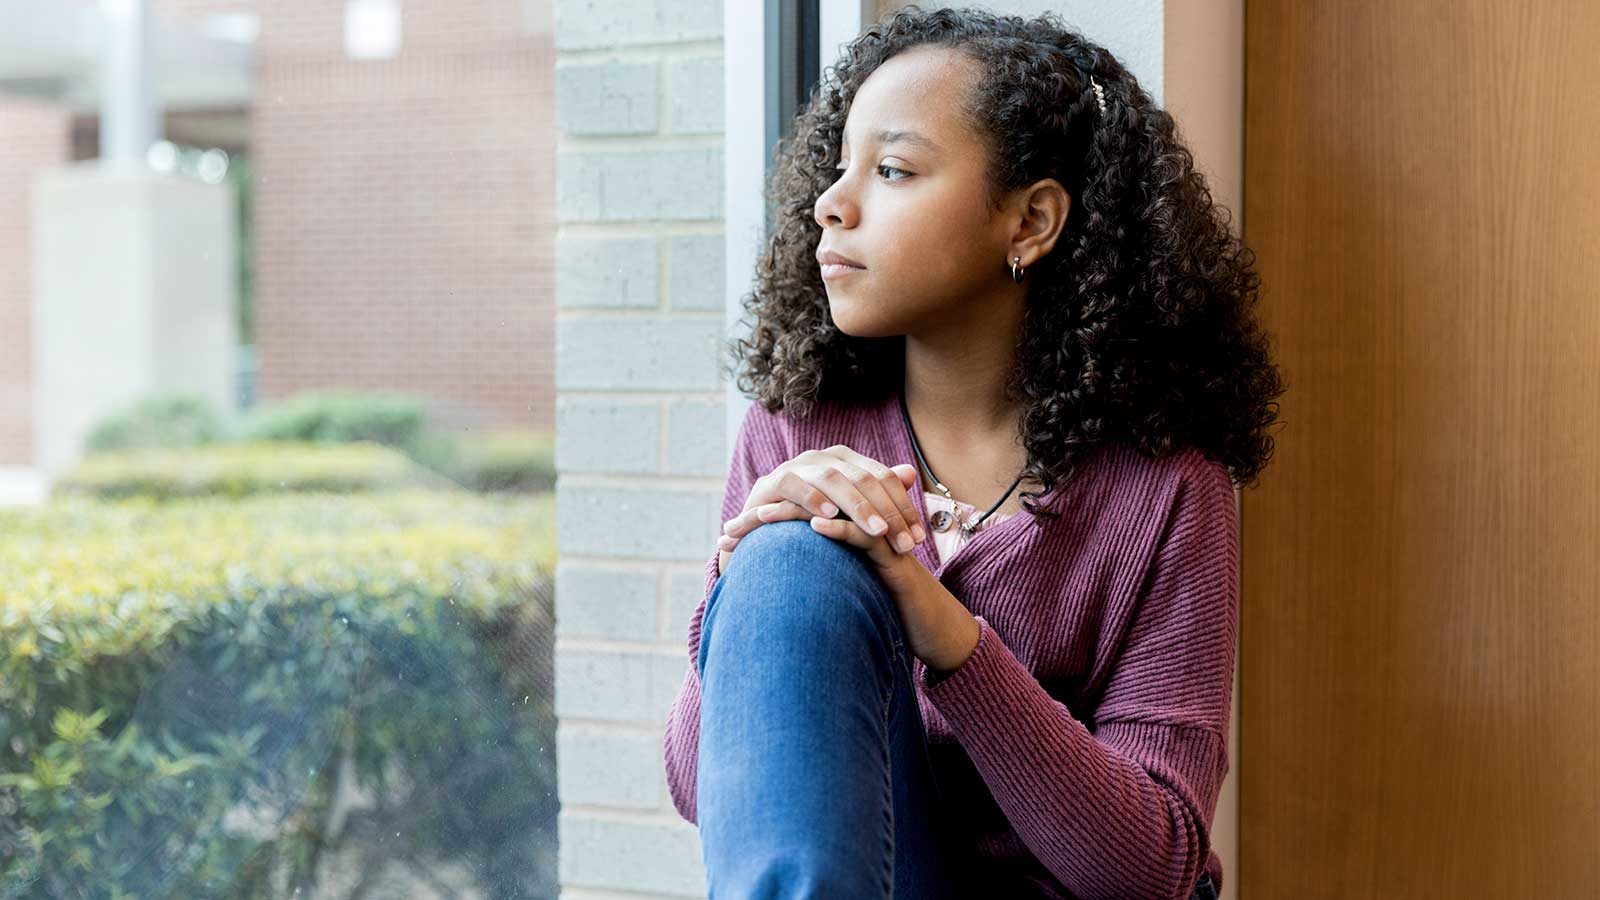 Preteen girl looking out the window with serious expression